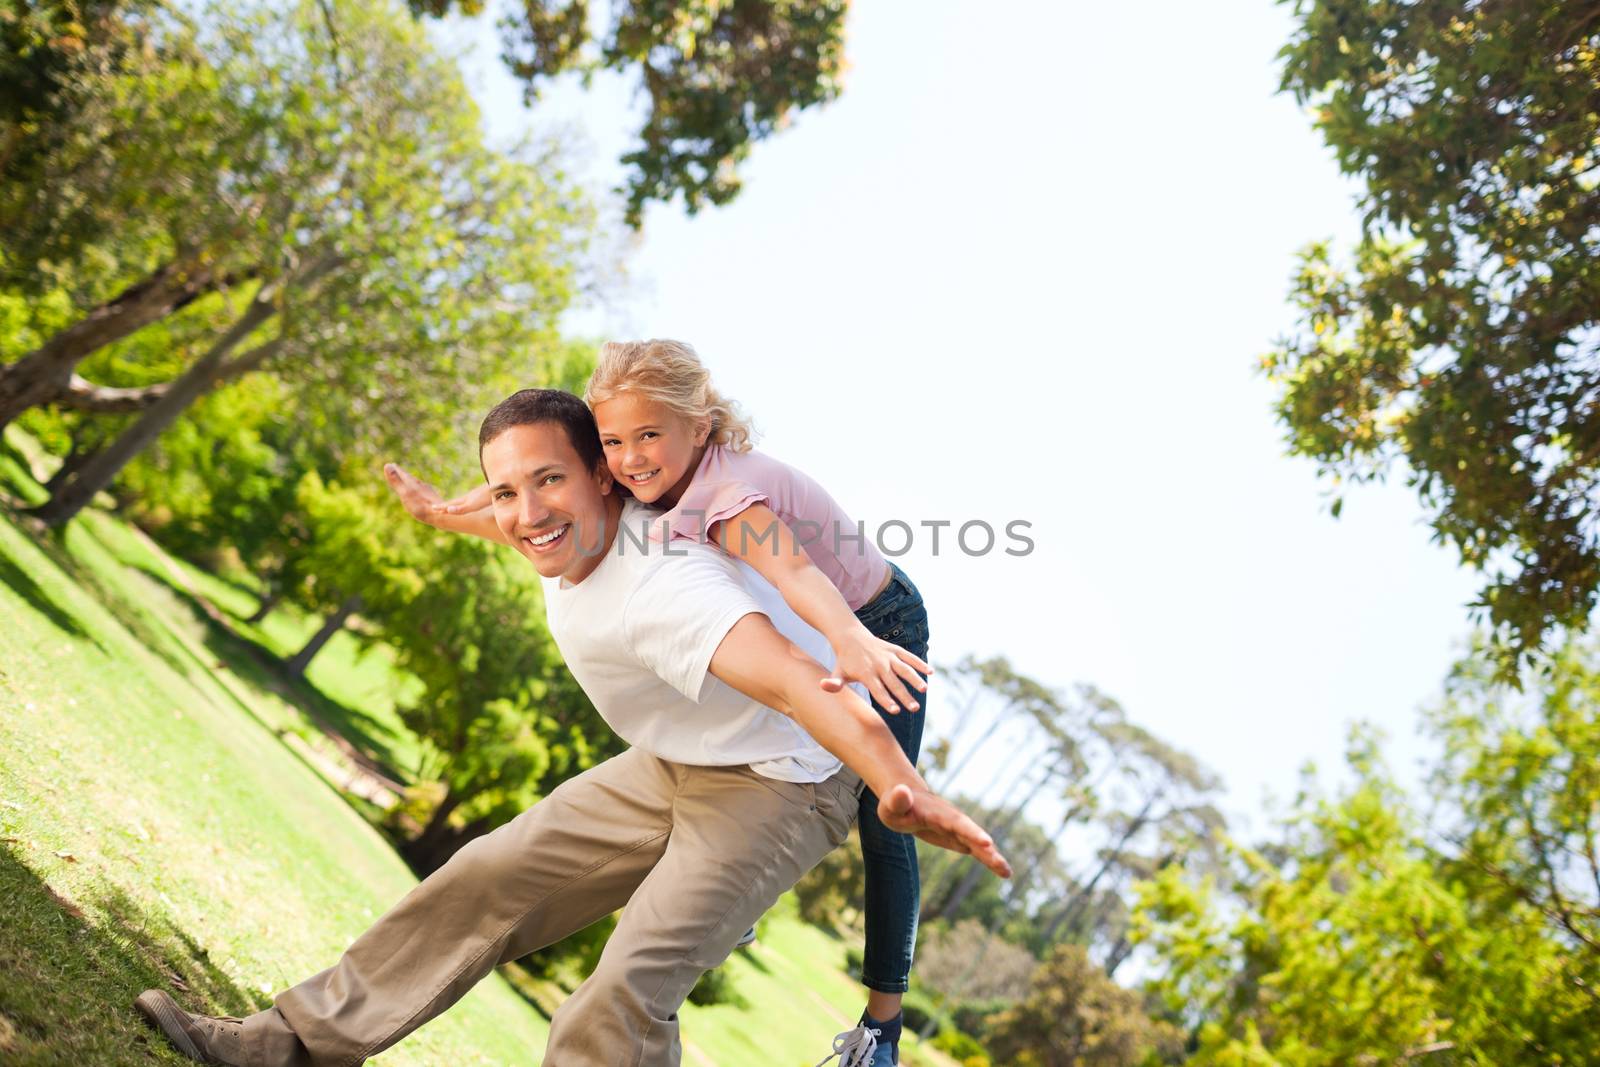 Little girl playing with her father in the park by Wavebreakmedia